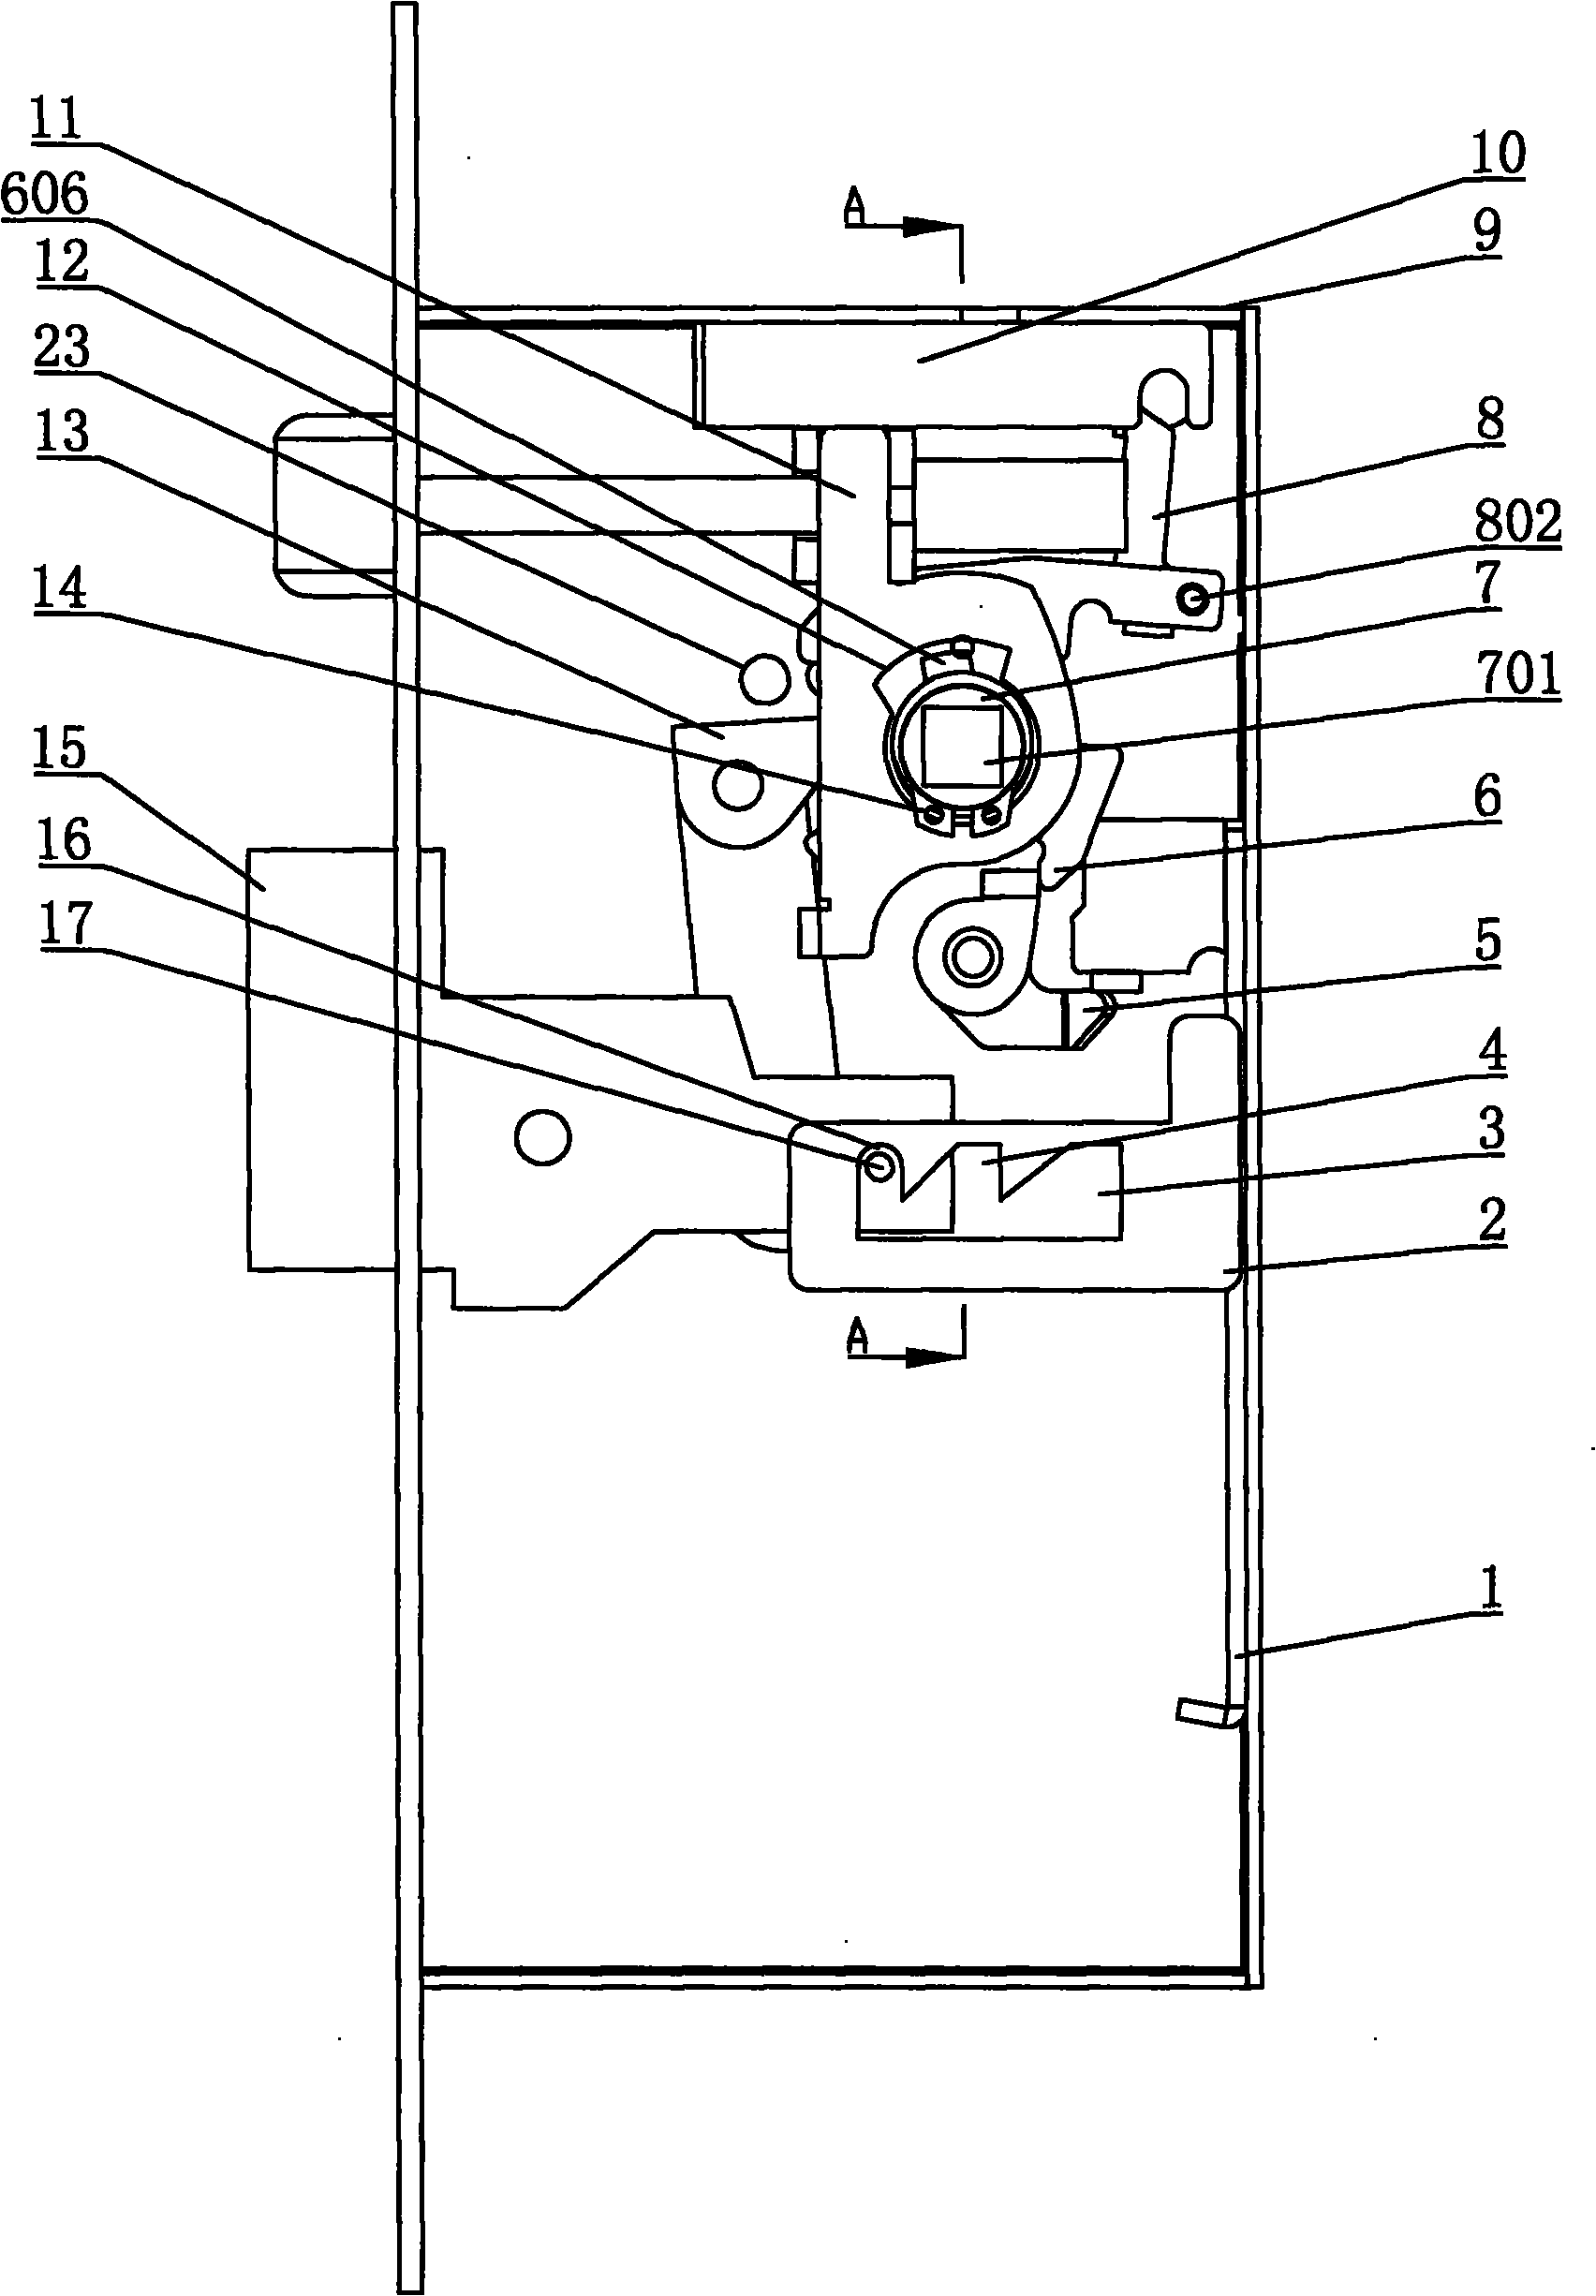 Clutch device of electronic lock